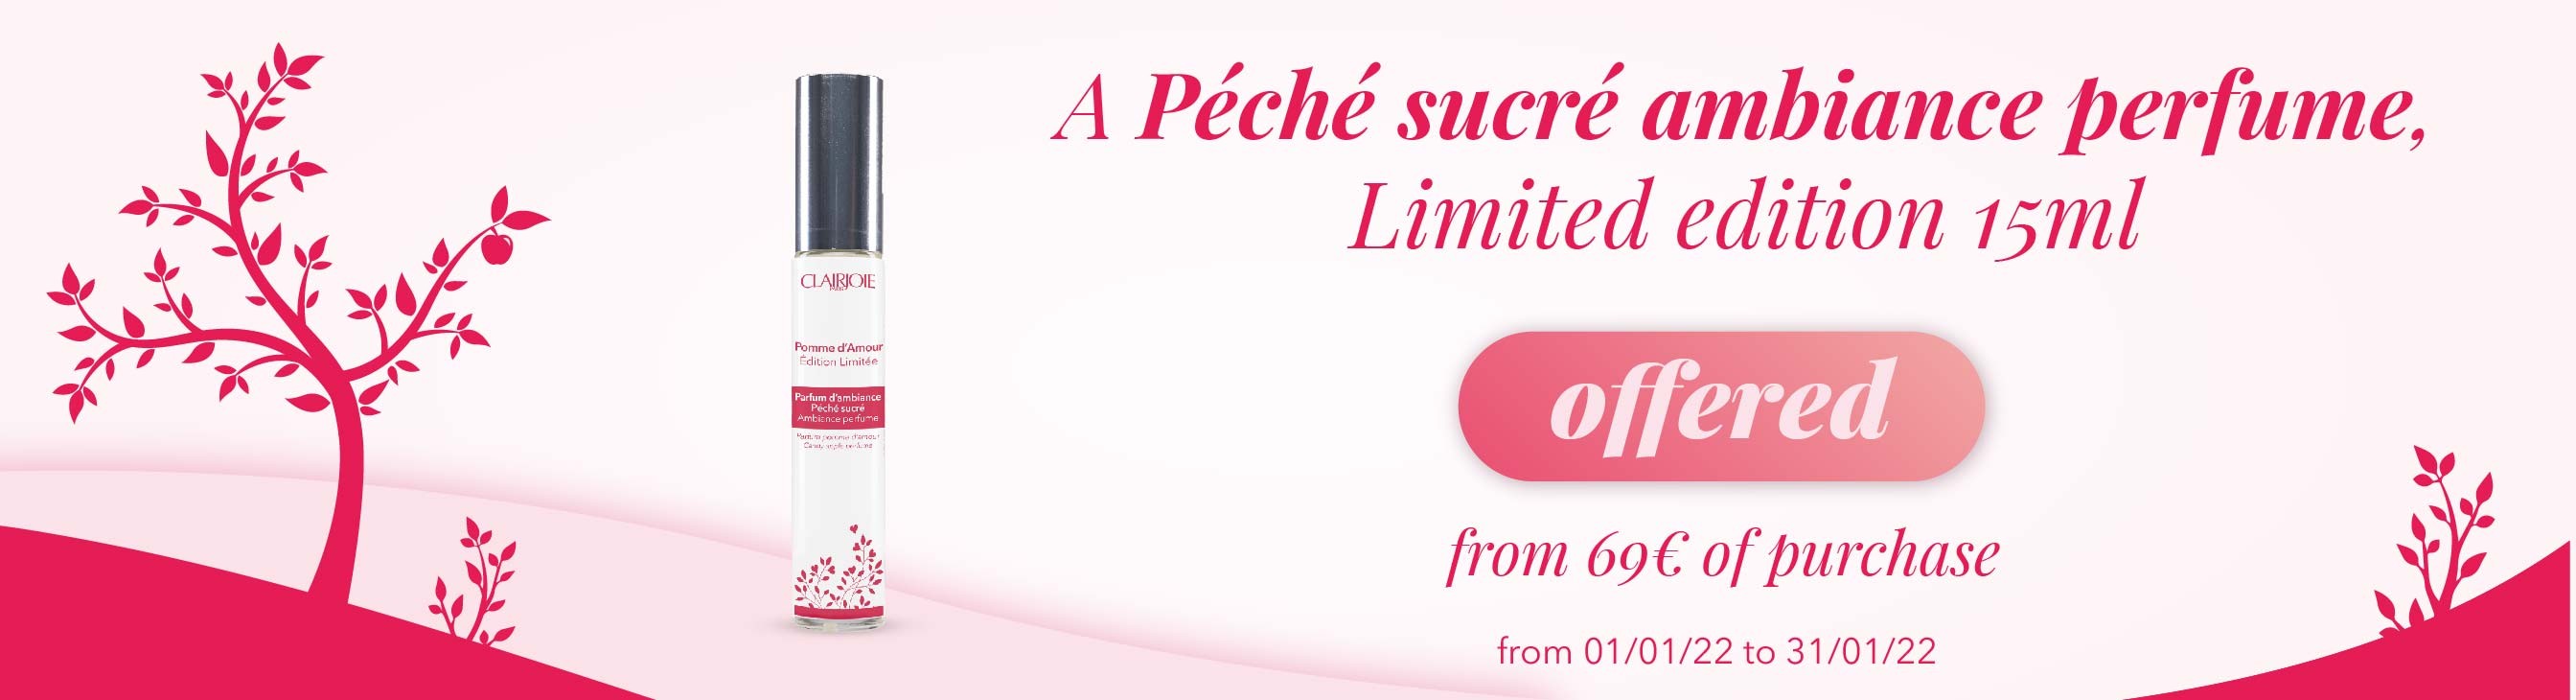 Client gift A Péché sucré ambiance Perfume limited edition from 69€ of purchase from 01/01/22 to 31/01/22